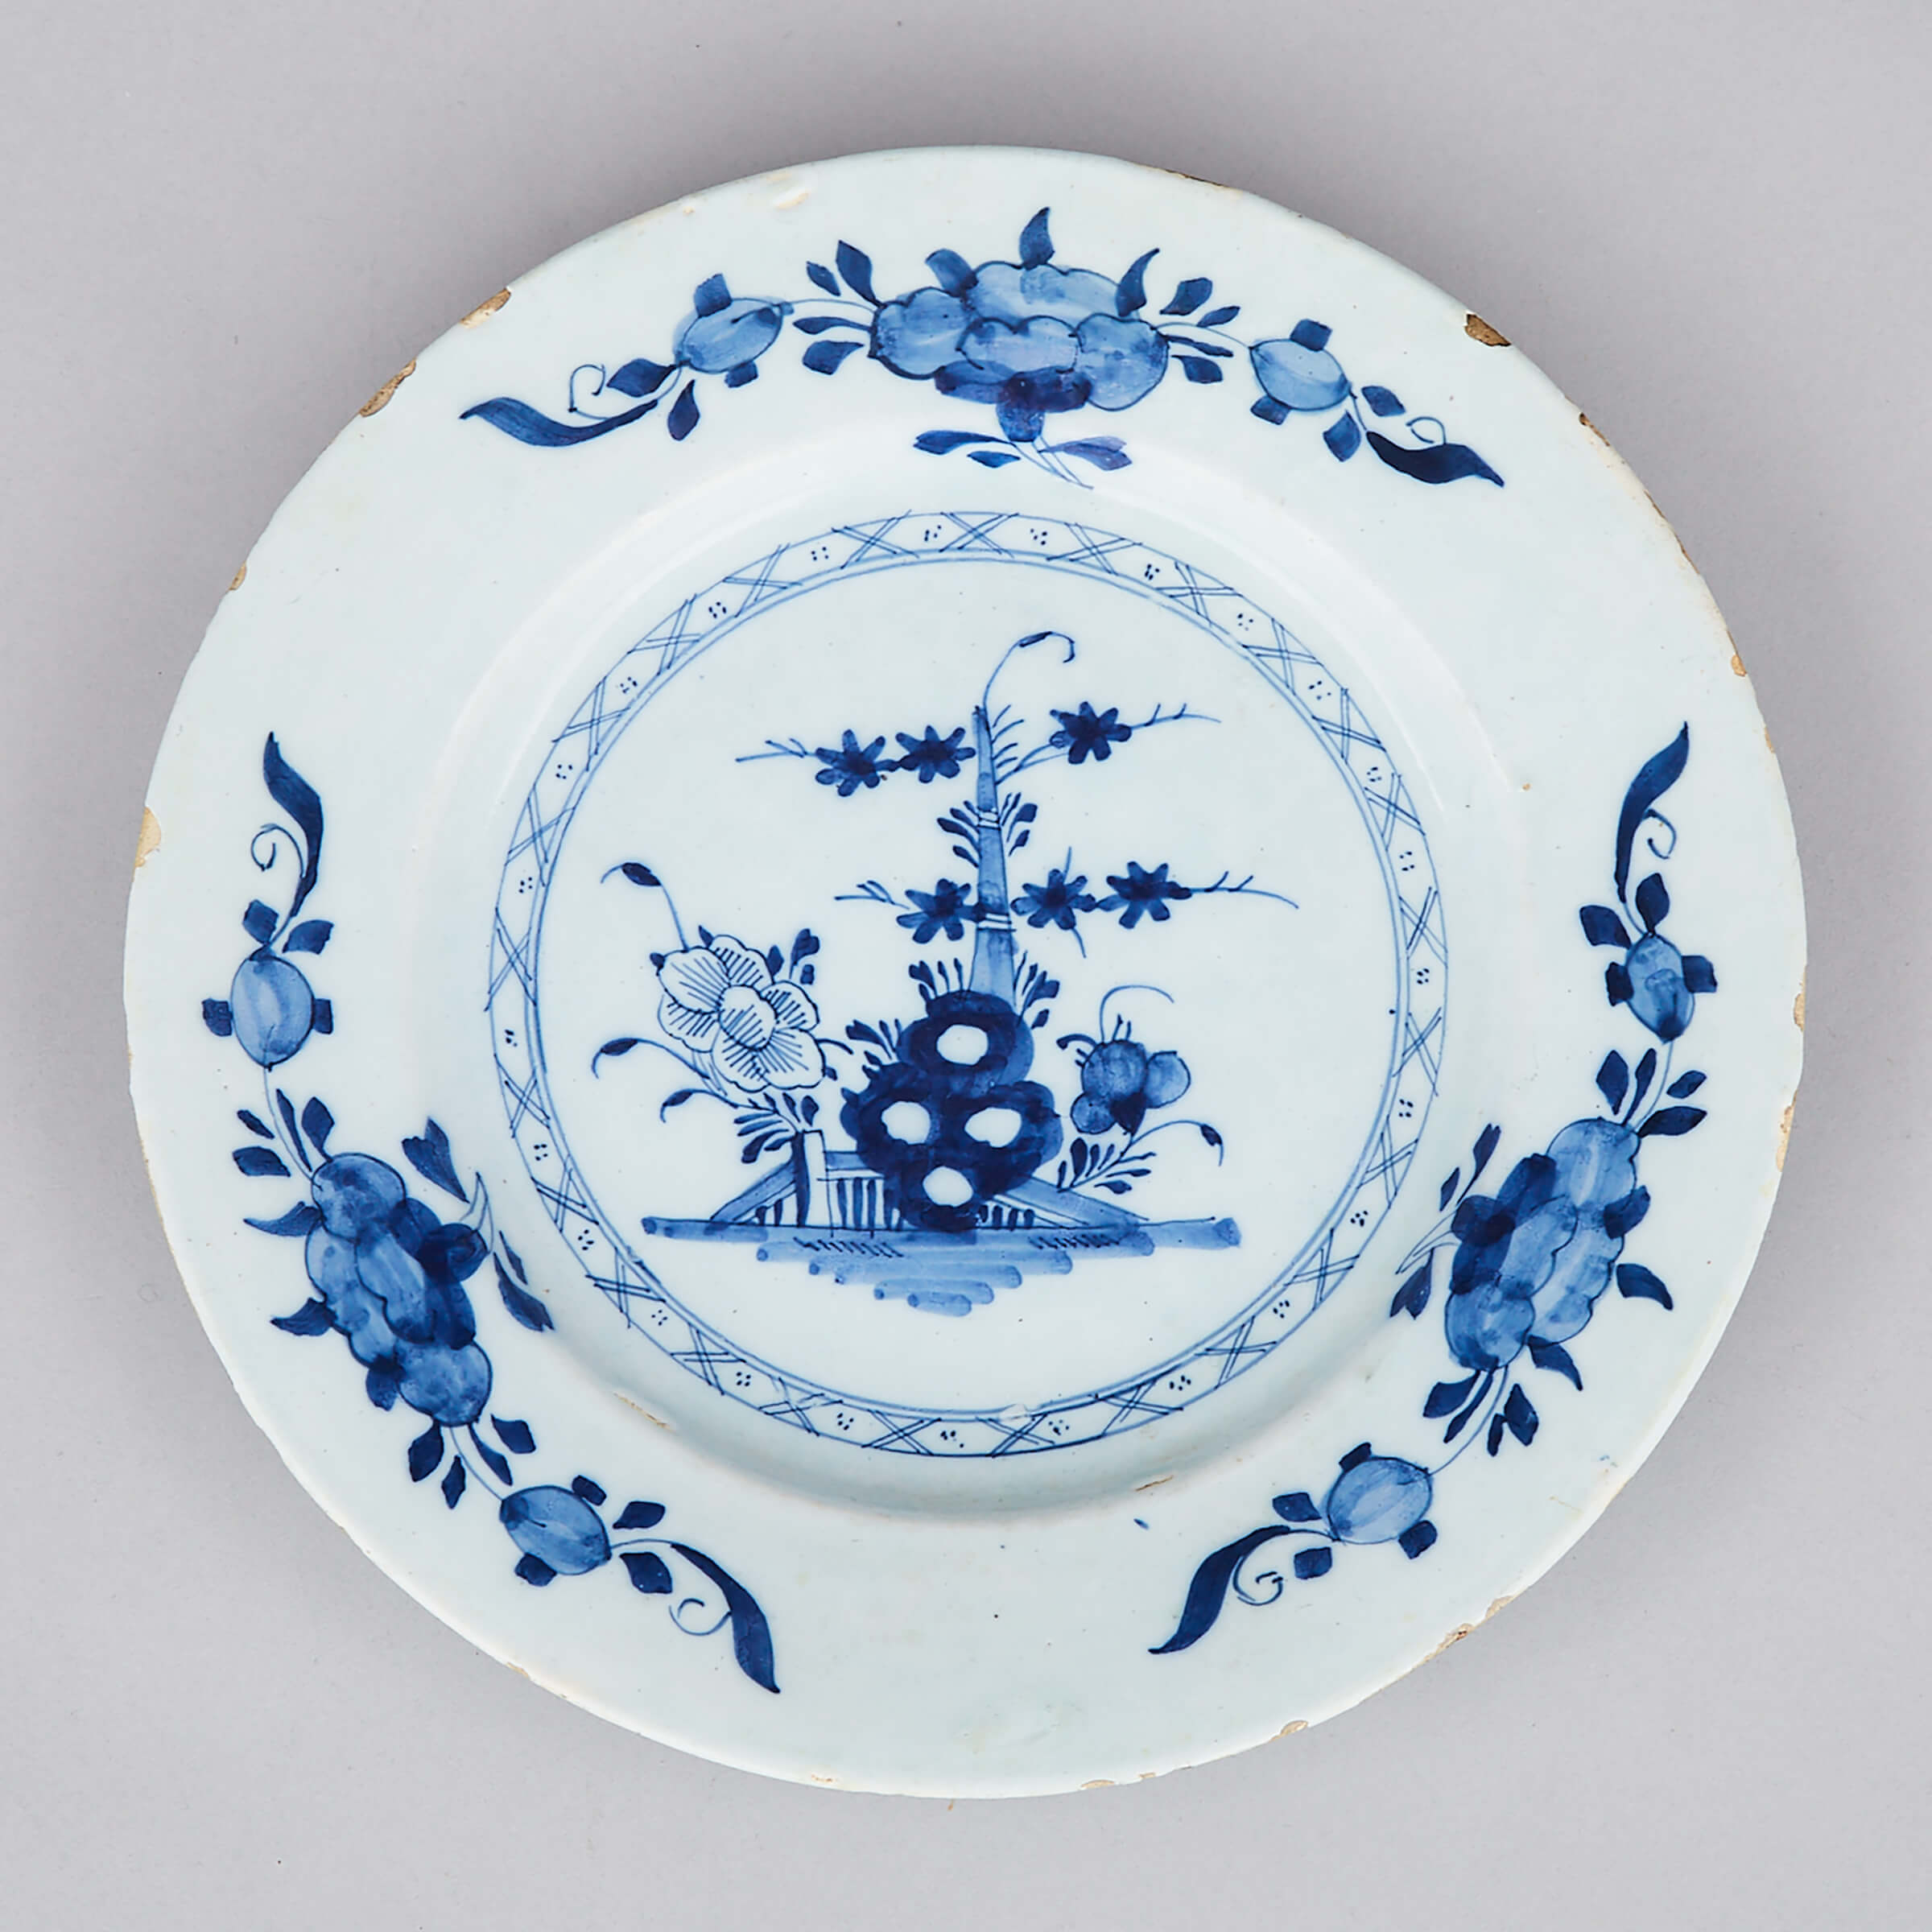 English Delft Blue and White Plate, probably Liverpool, c.1770